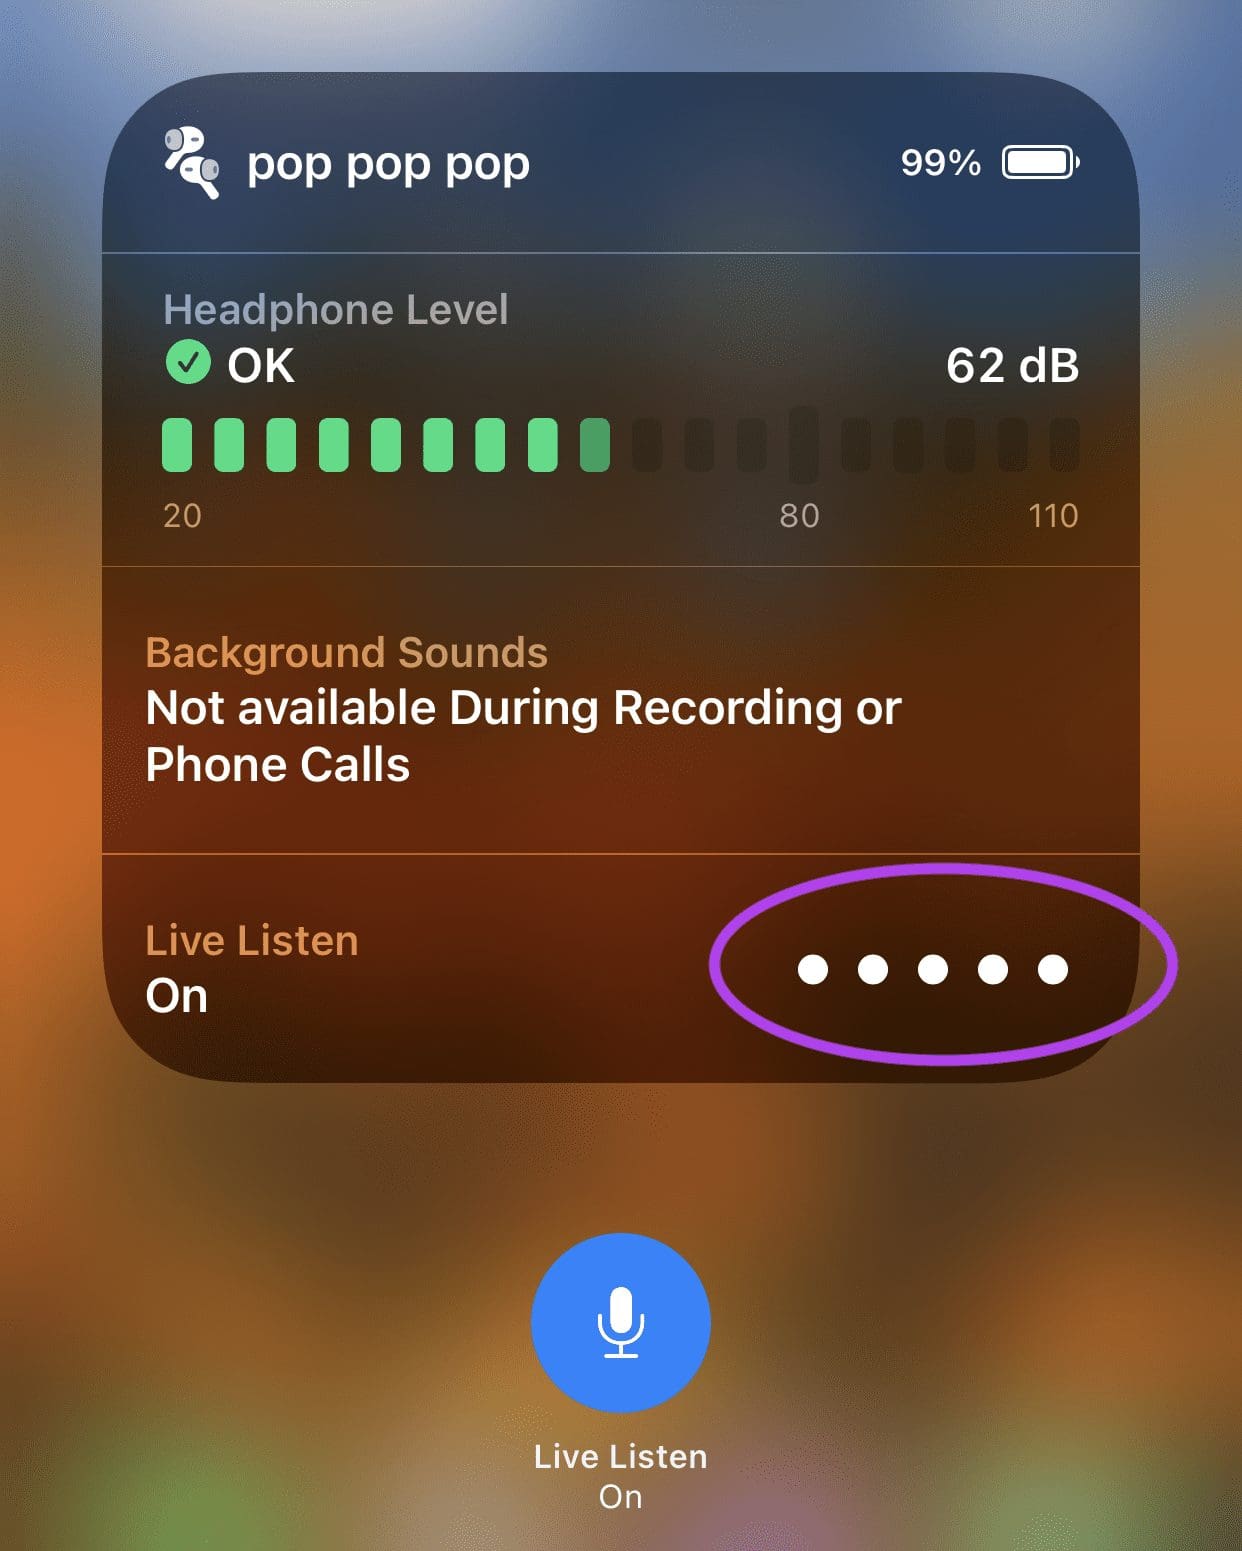 Live Listen Features While in Use